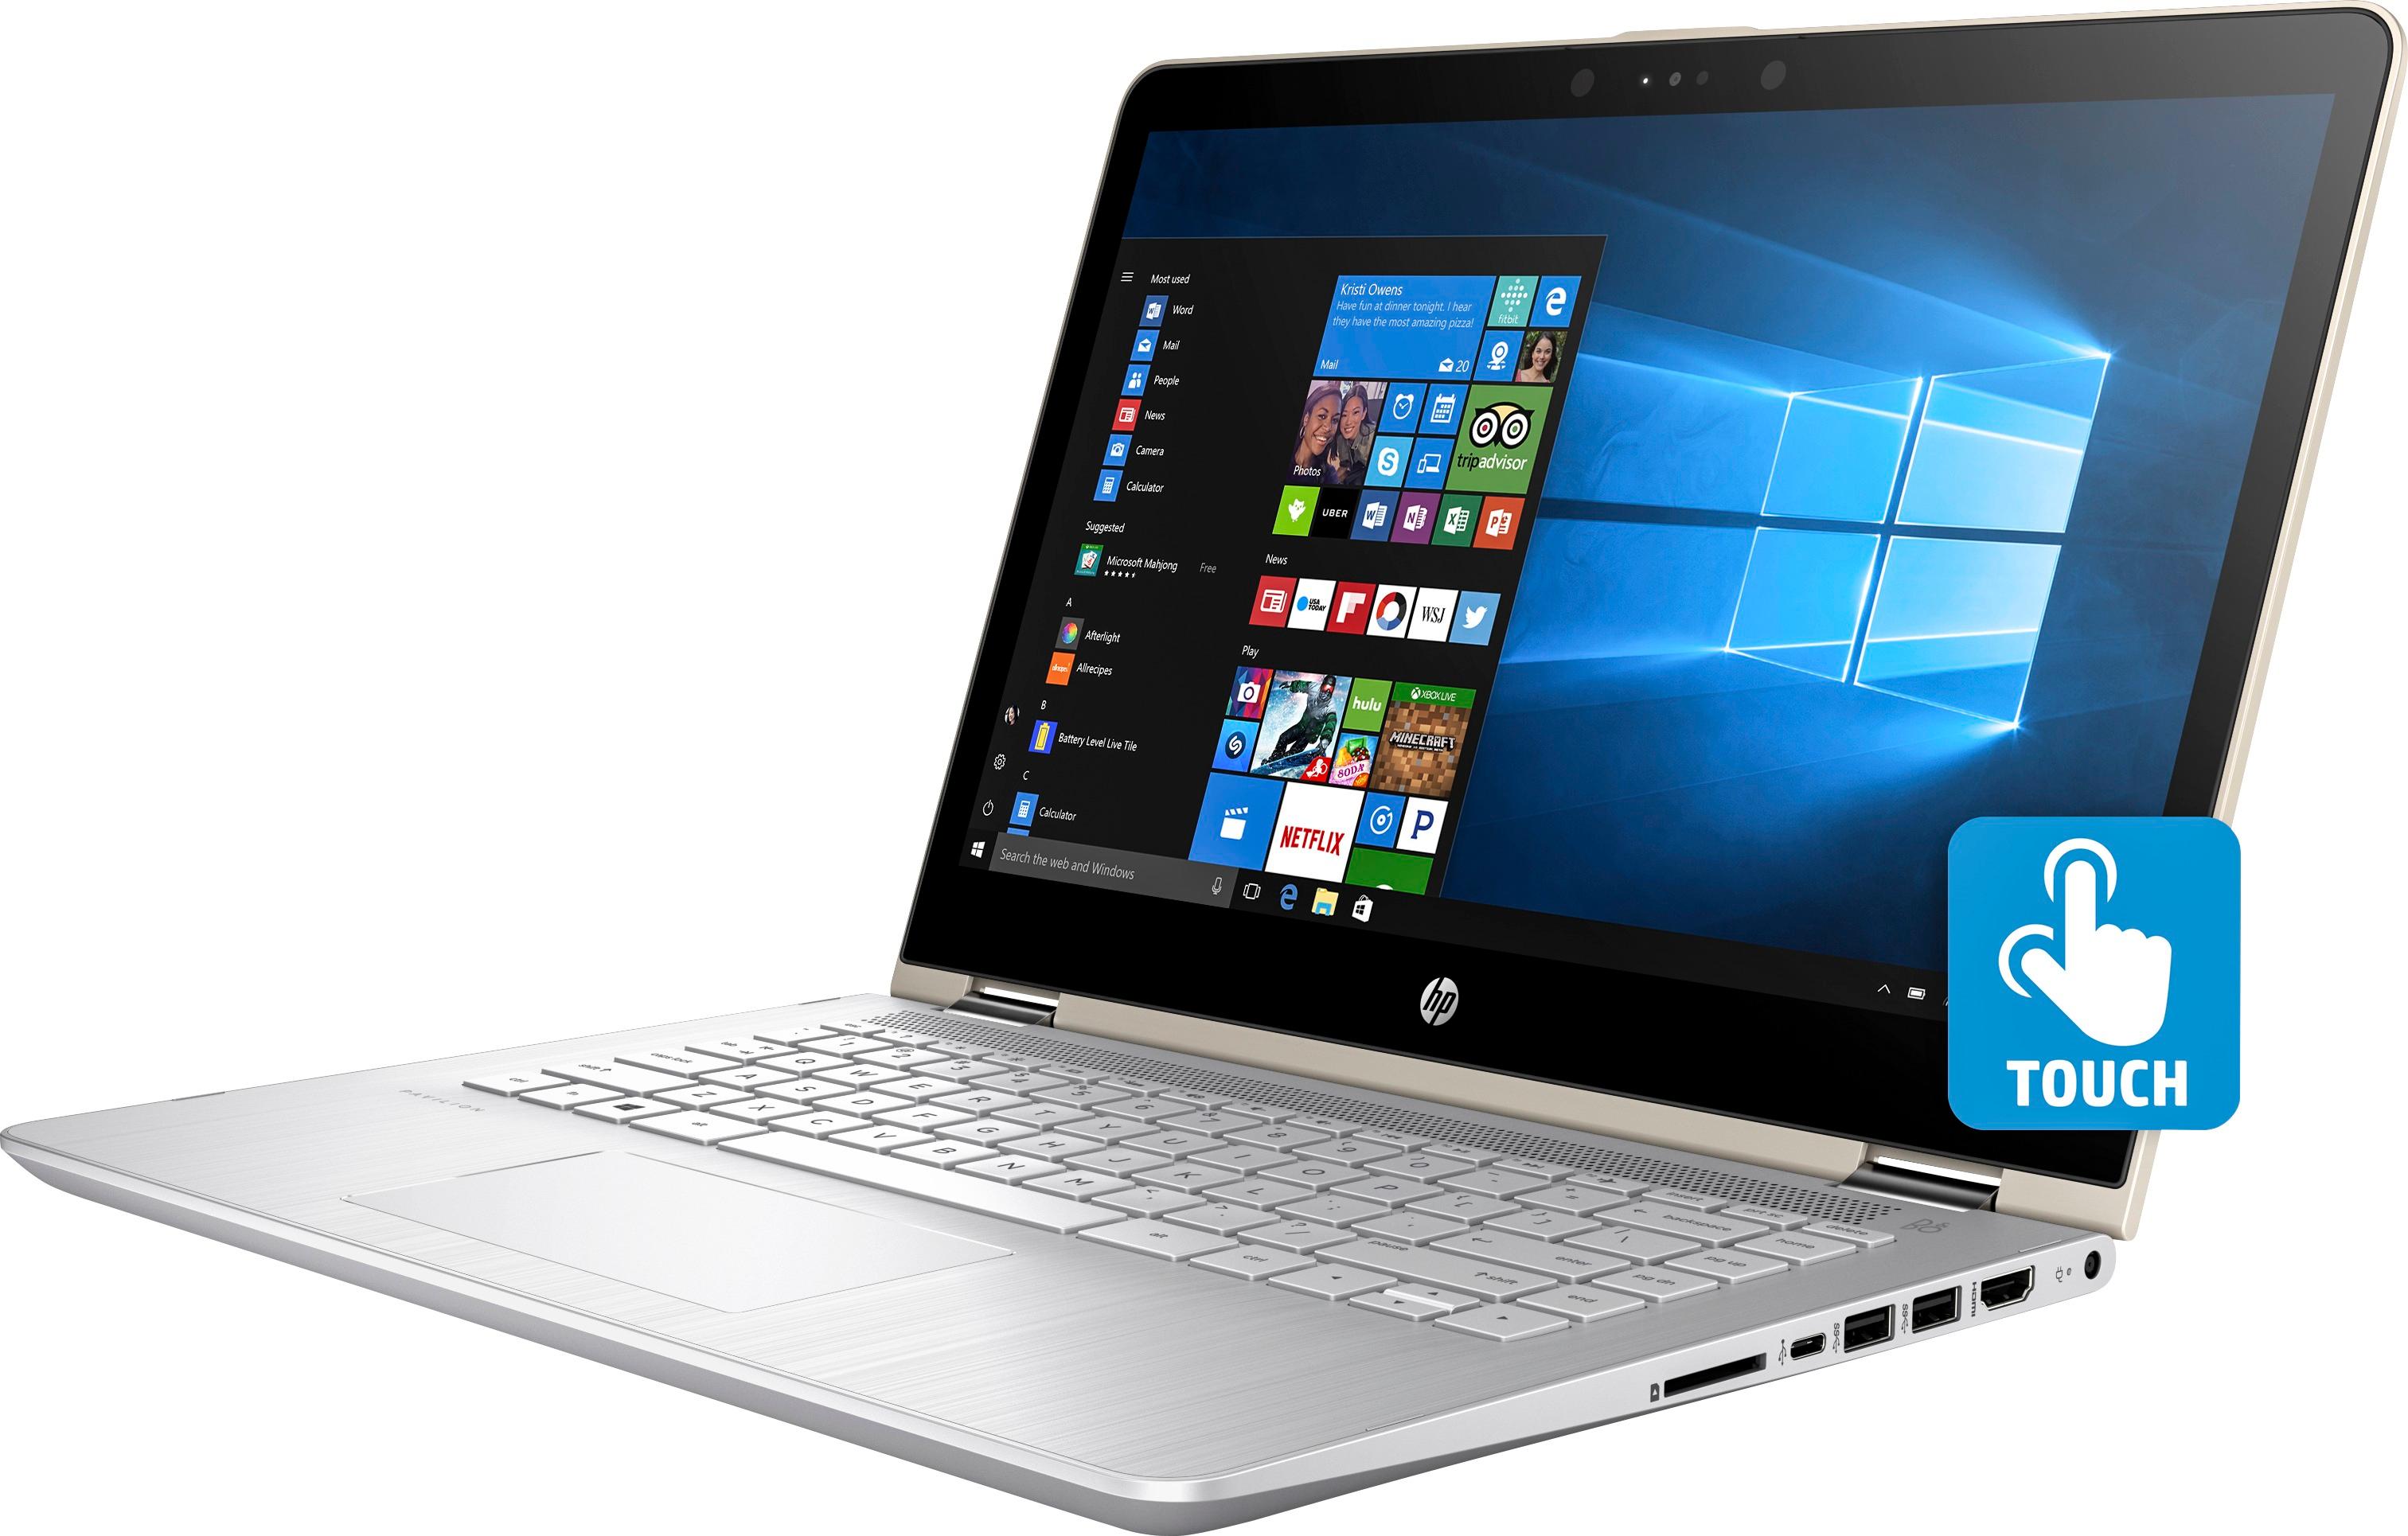 HP Pavilion X360 14 Range of Laptops Launched in India